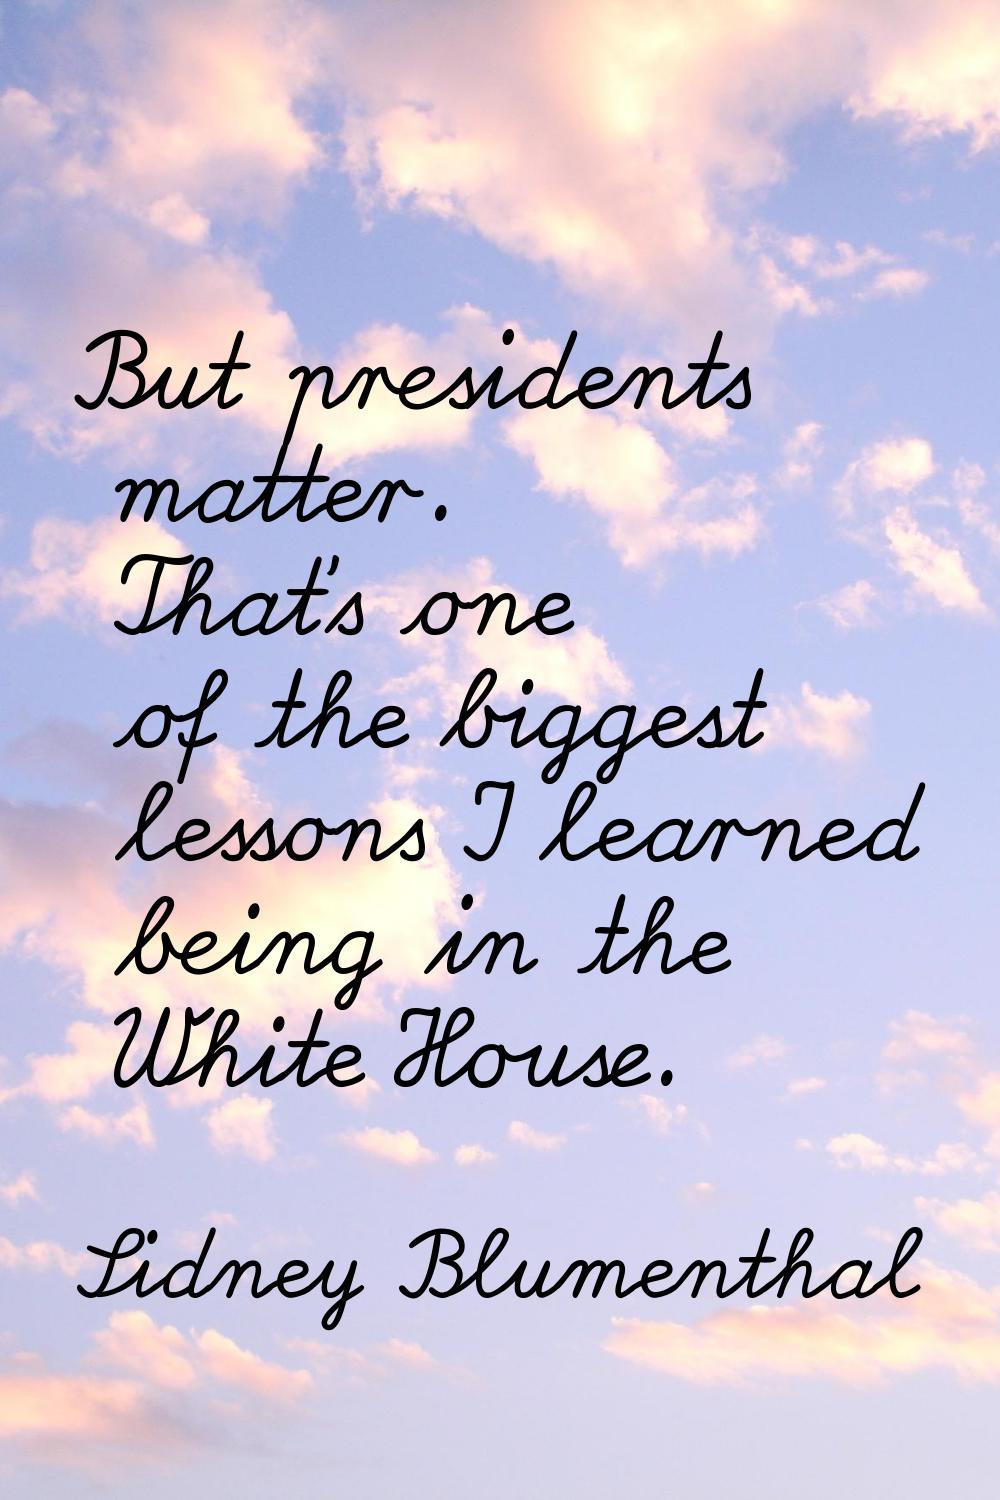 But presidents matter. That's one of the biggest lessons I learned being in the White House.